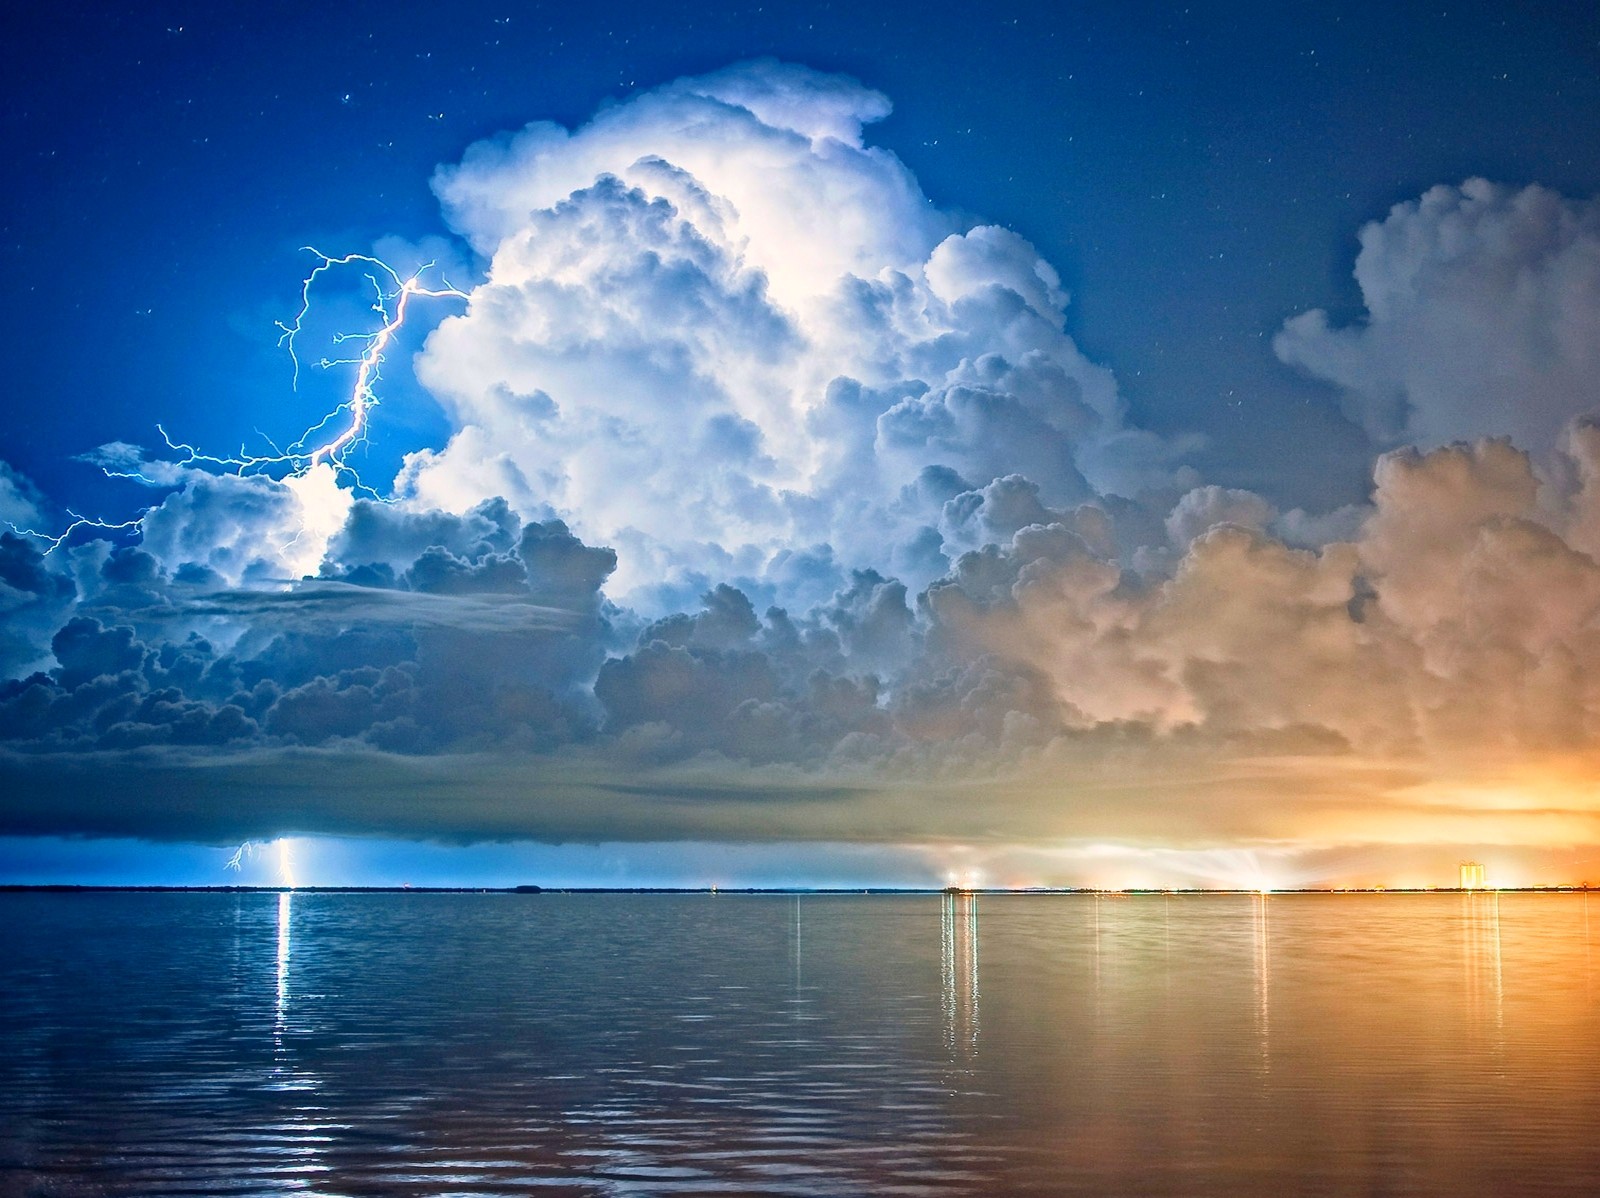 Lightning Clouds Storm Starry Night Cape Canaveral Florida Sea Street Light Water Blue White Yellow  1600x1198